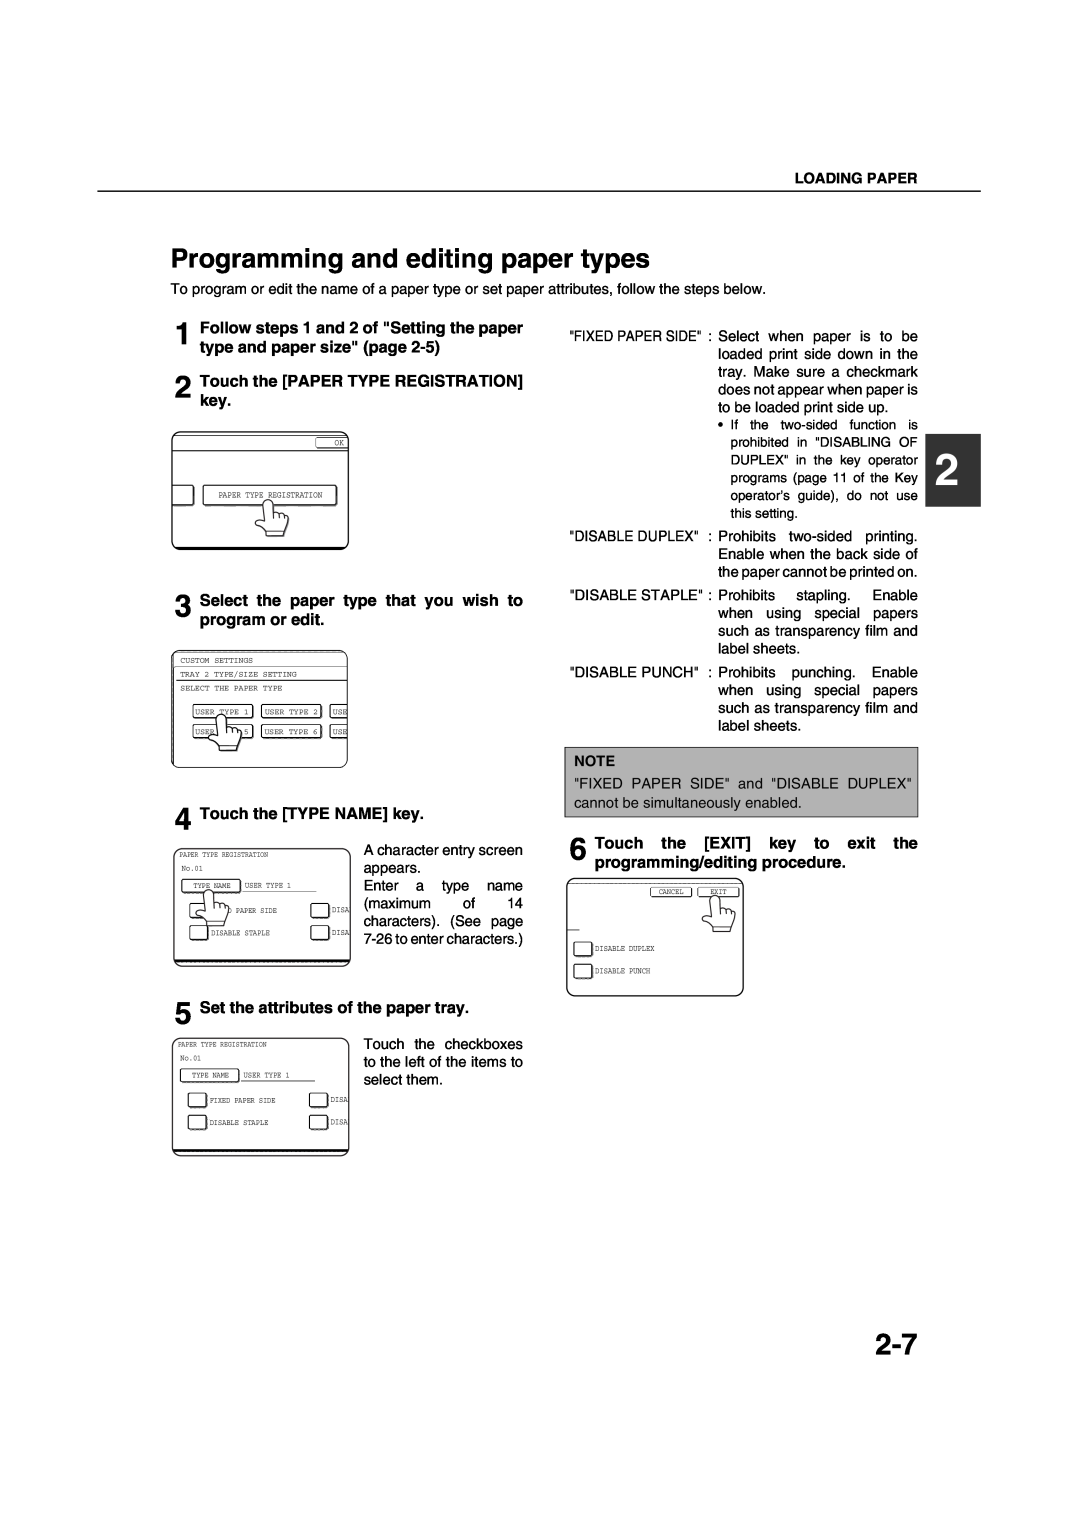 Sharp AR-M451N Programming and editing paper types, Follow steps 1 and 2 of Setting the paper type and paper size page 